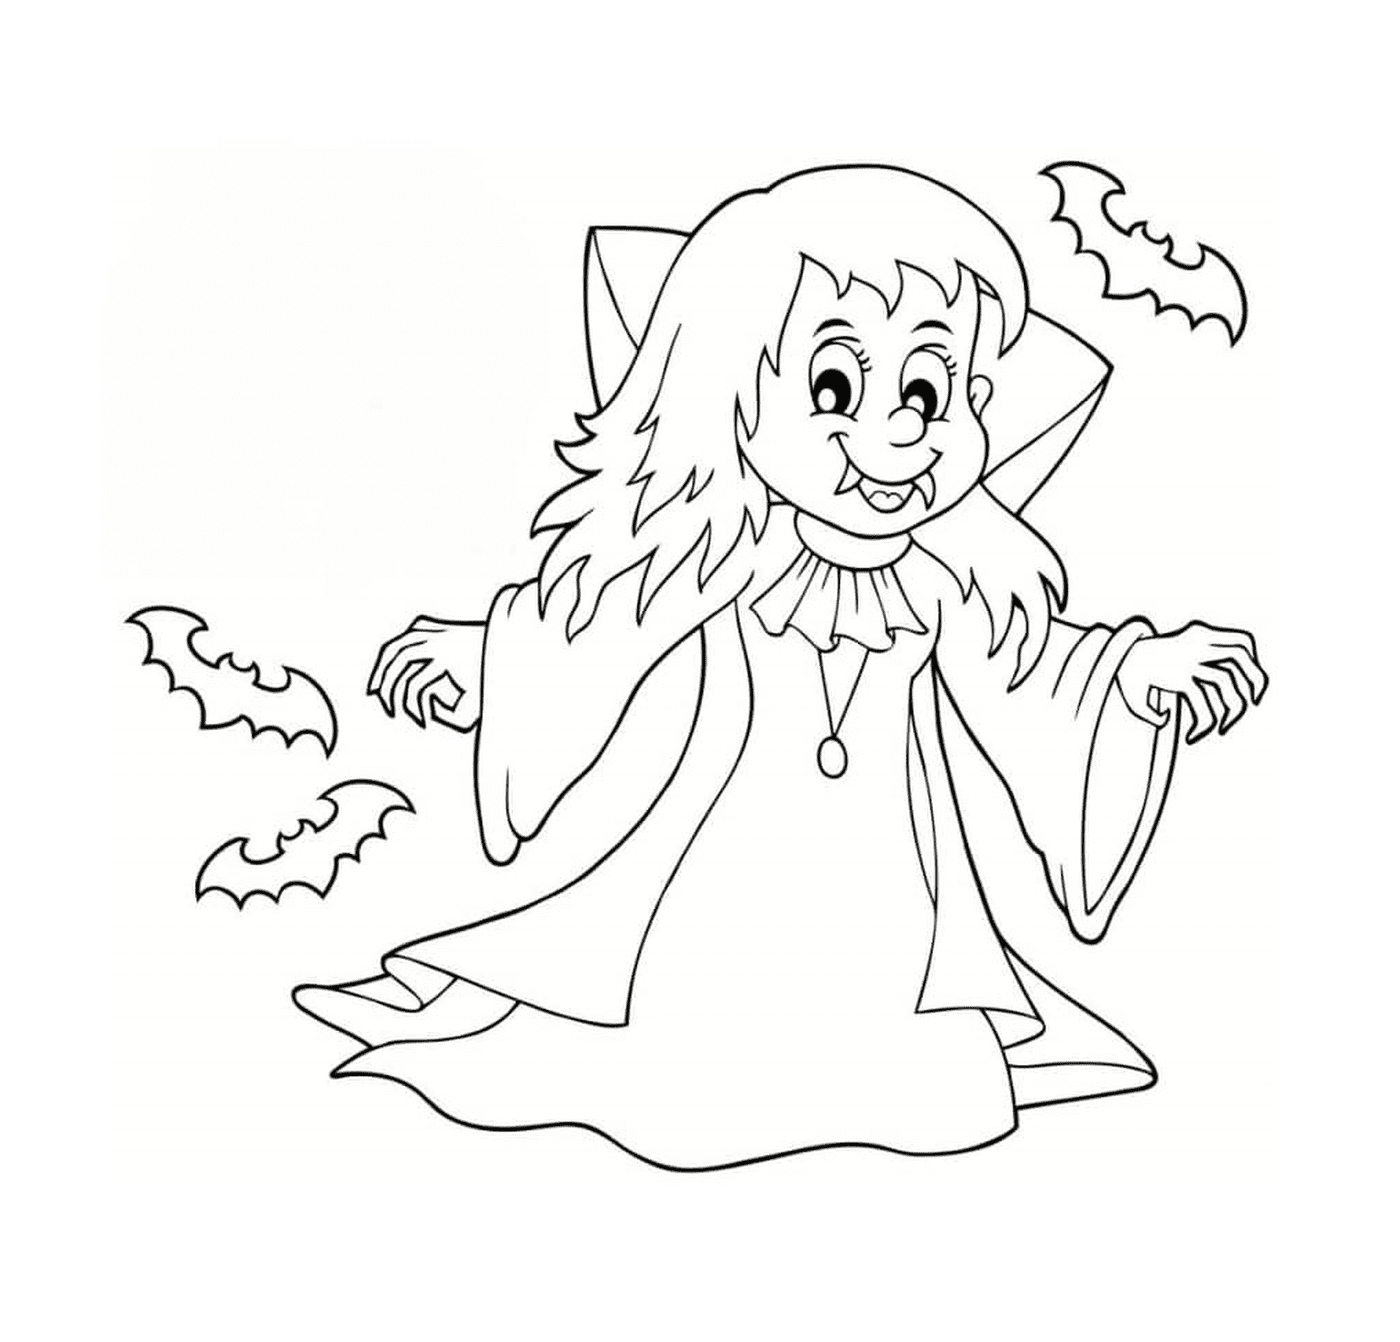  Vampire girl for Halloween, cute and malicious 